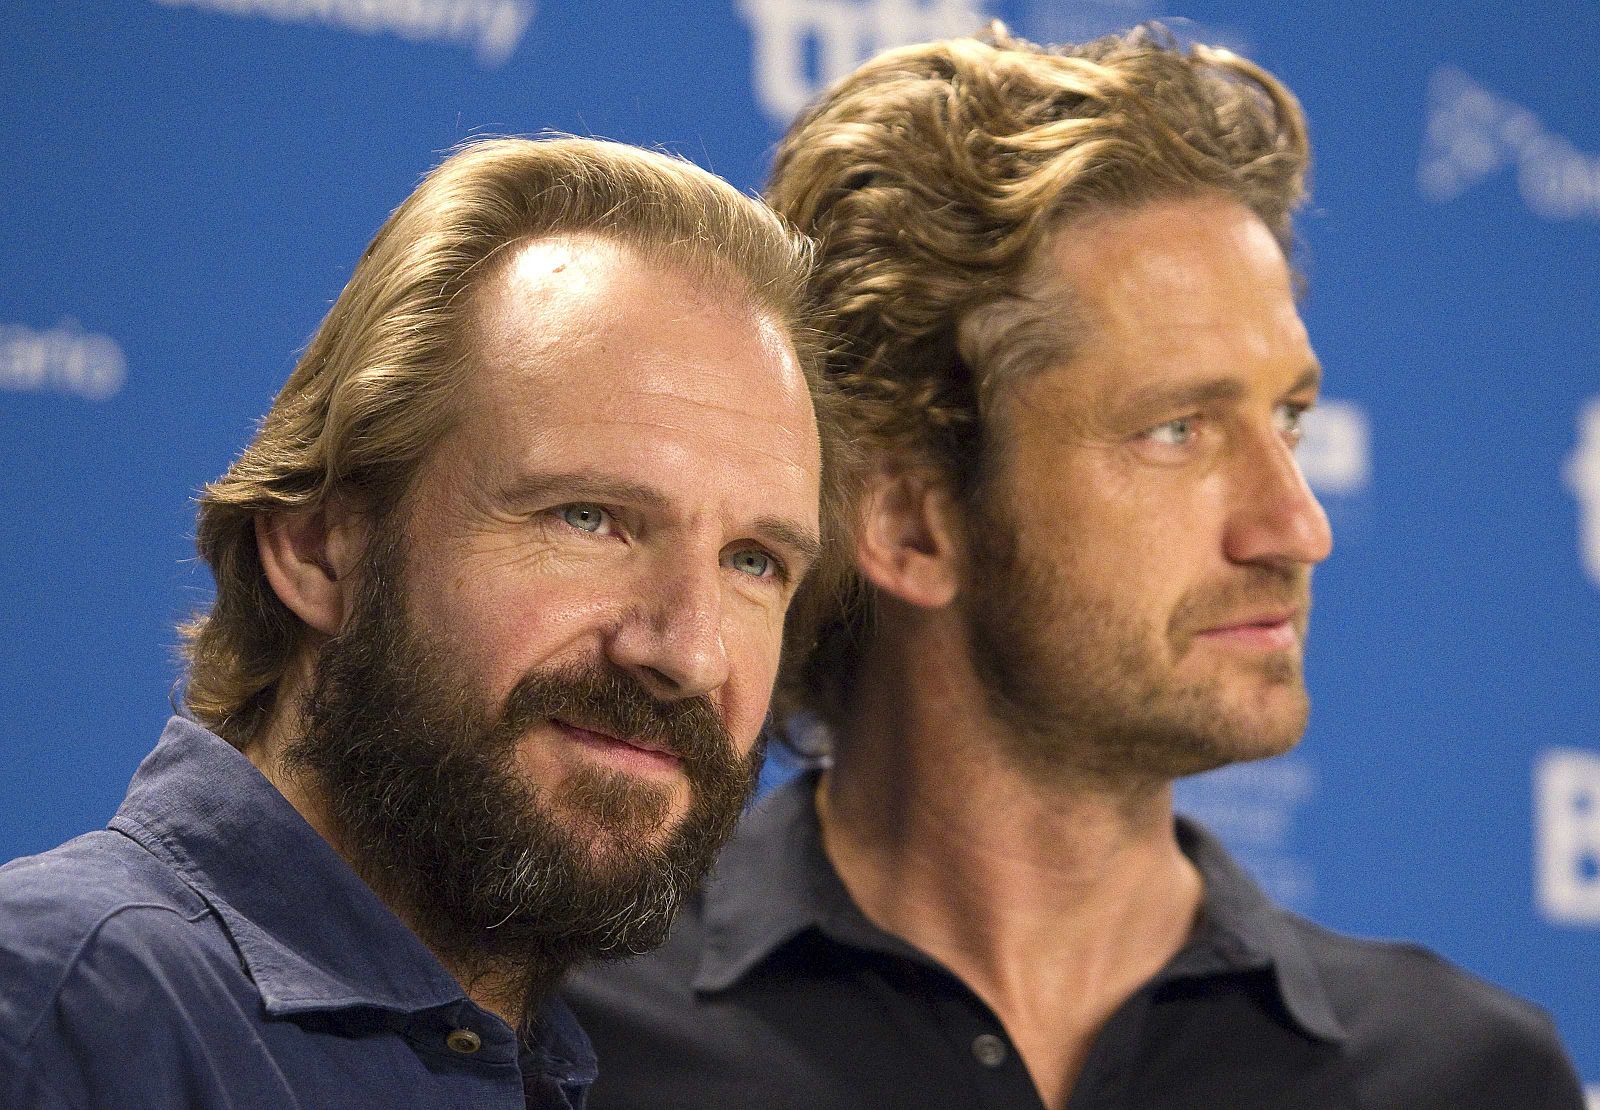 Director and actor Ralph Fiennes and actor Gerard Butler attend the news conference for the film "Coriolanus" at the 36th Toronto International Film Festival in Toronto